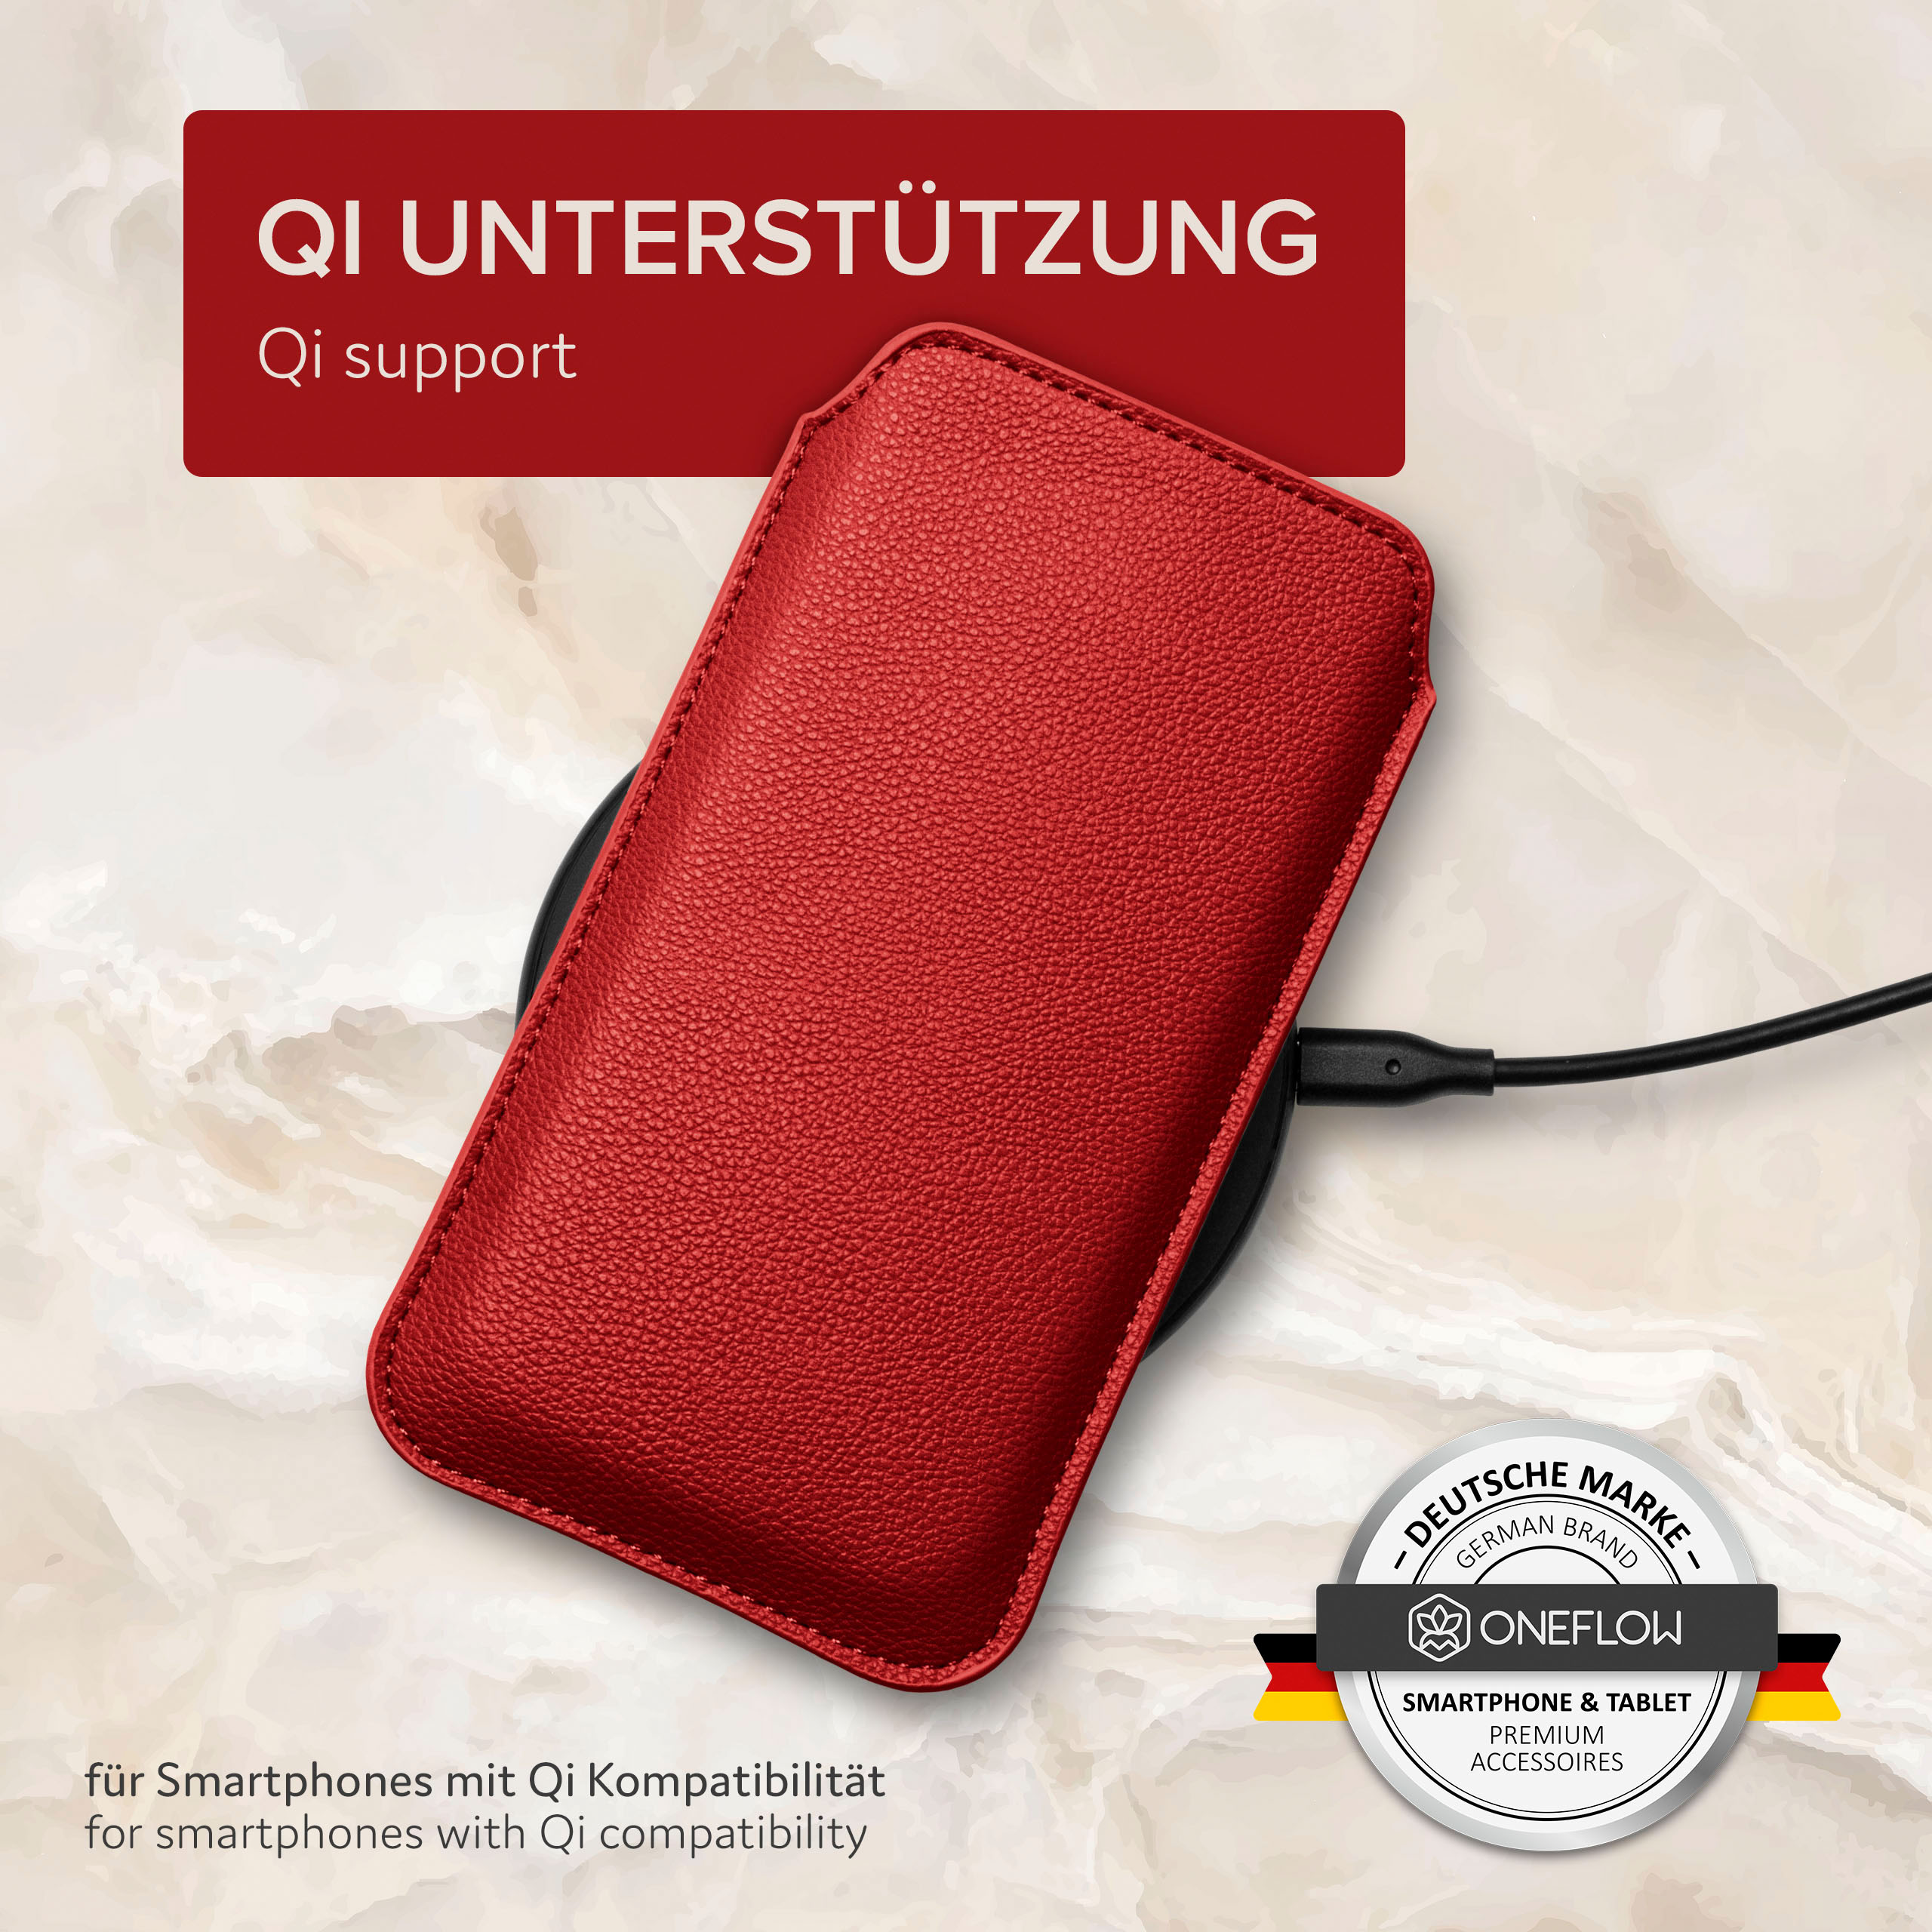 ONEFLOW Einsteckhülle Z3 mit Xperia Zuglasche, Compact, Cover, Dunkelrot Sony, Full